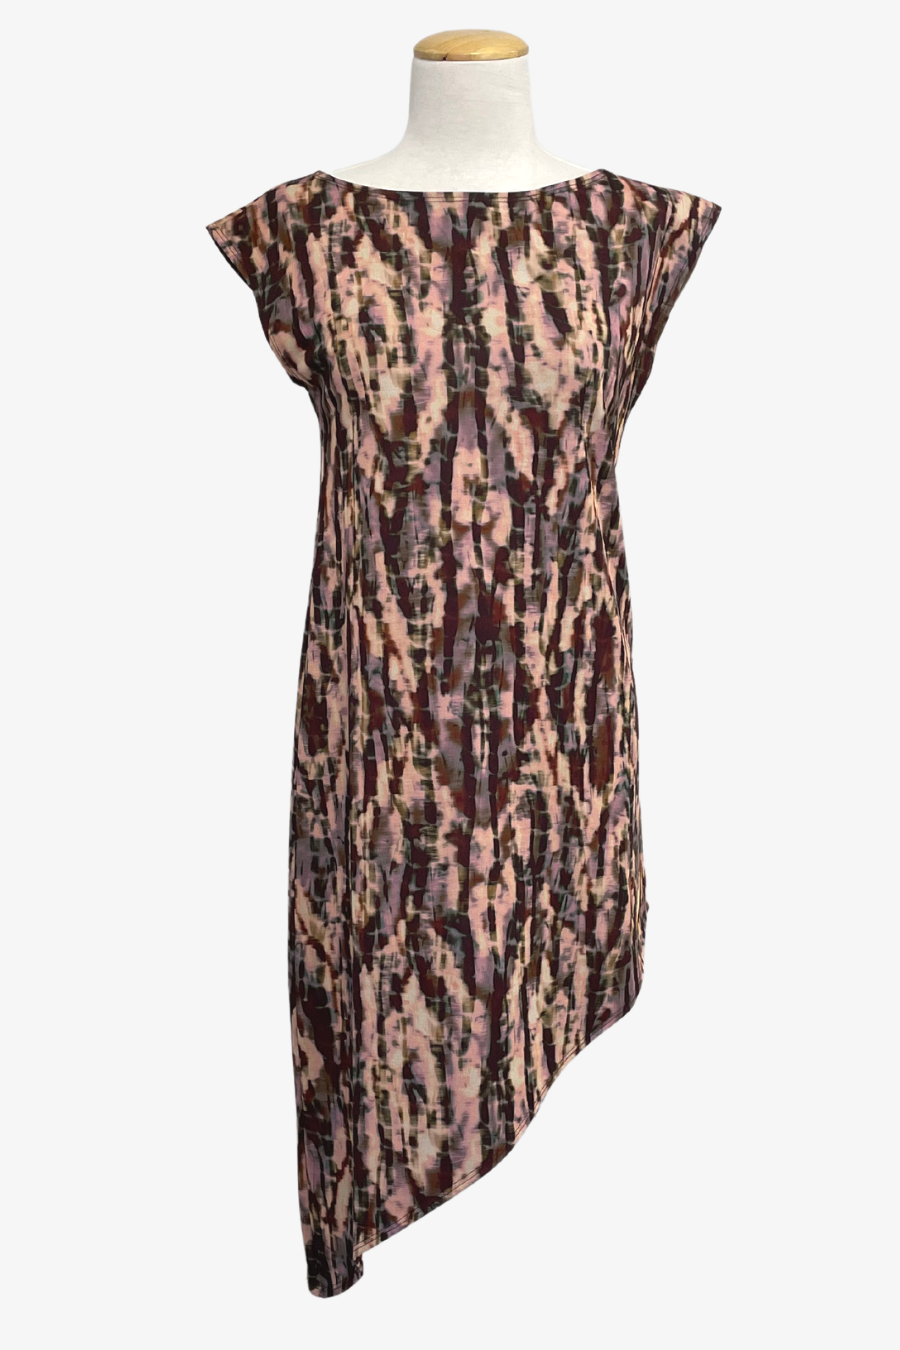 Thomas Tunic in Corteccia Print Fabric ONLINE ONLY